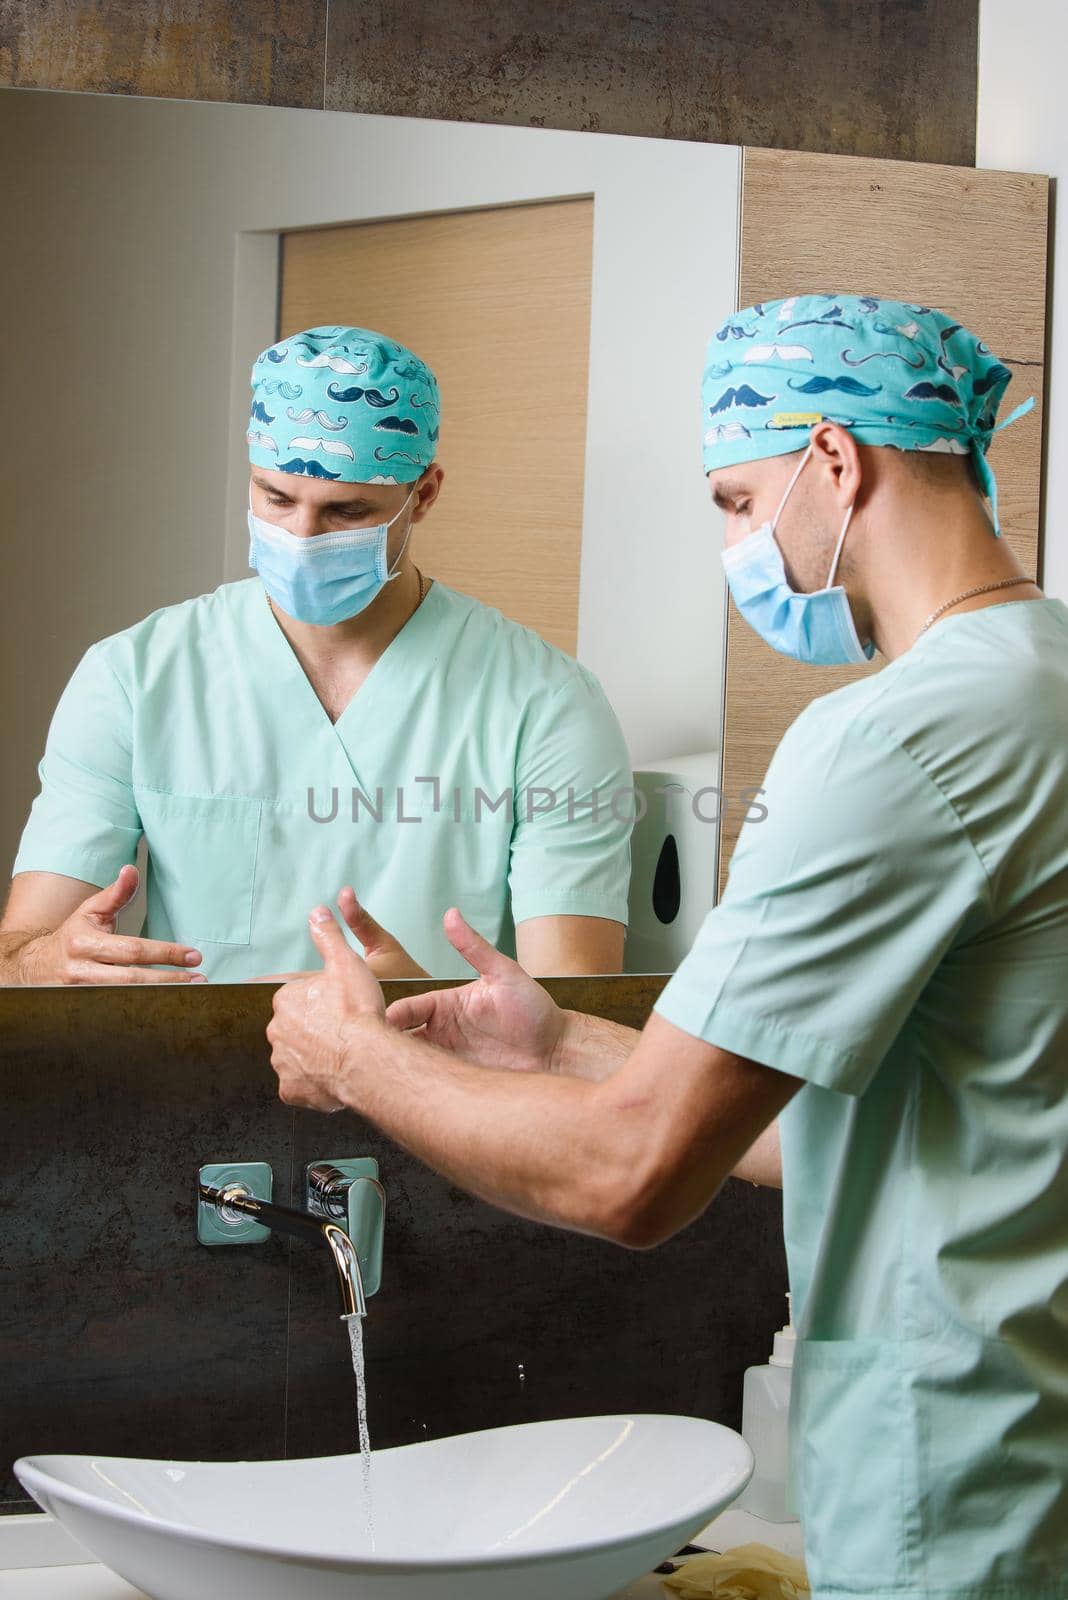 Surgeon is looking at the cleanliness of his hands after washing under a stream of water. Hygiene before working with patients.